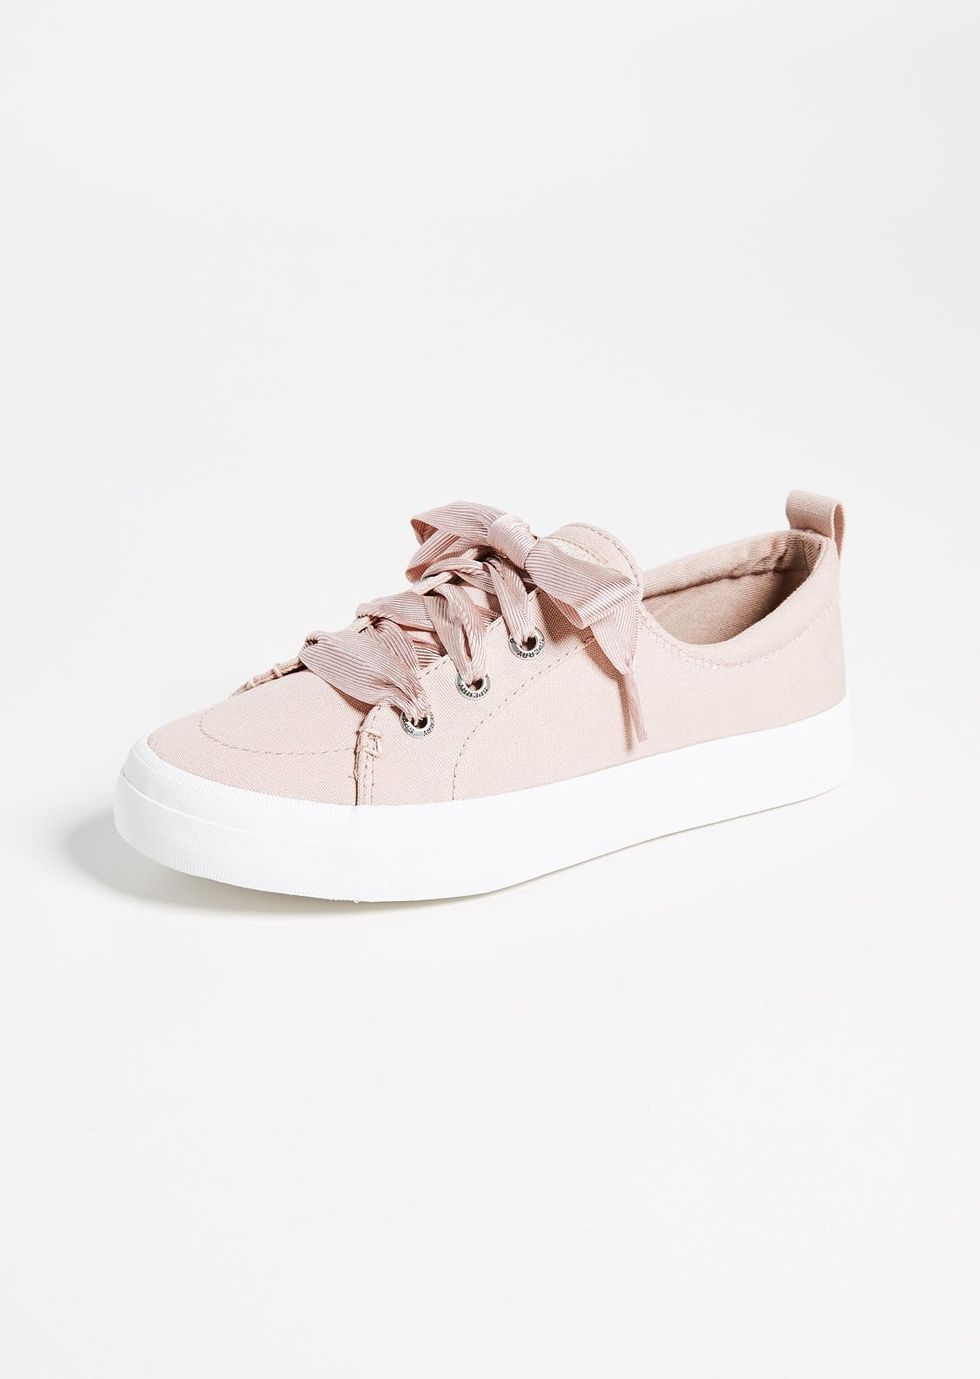 12 Sneakers That Might Replace Your Heels for Good - Brit + Co